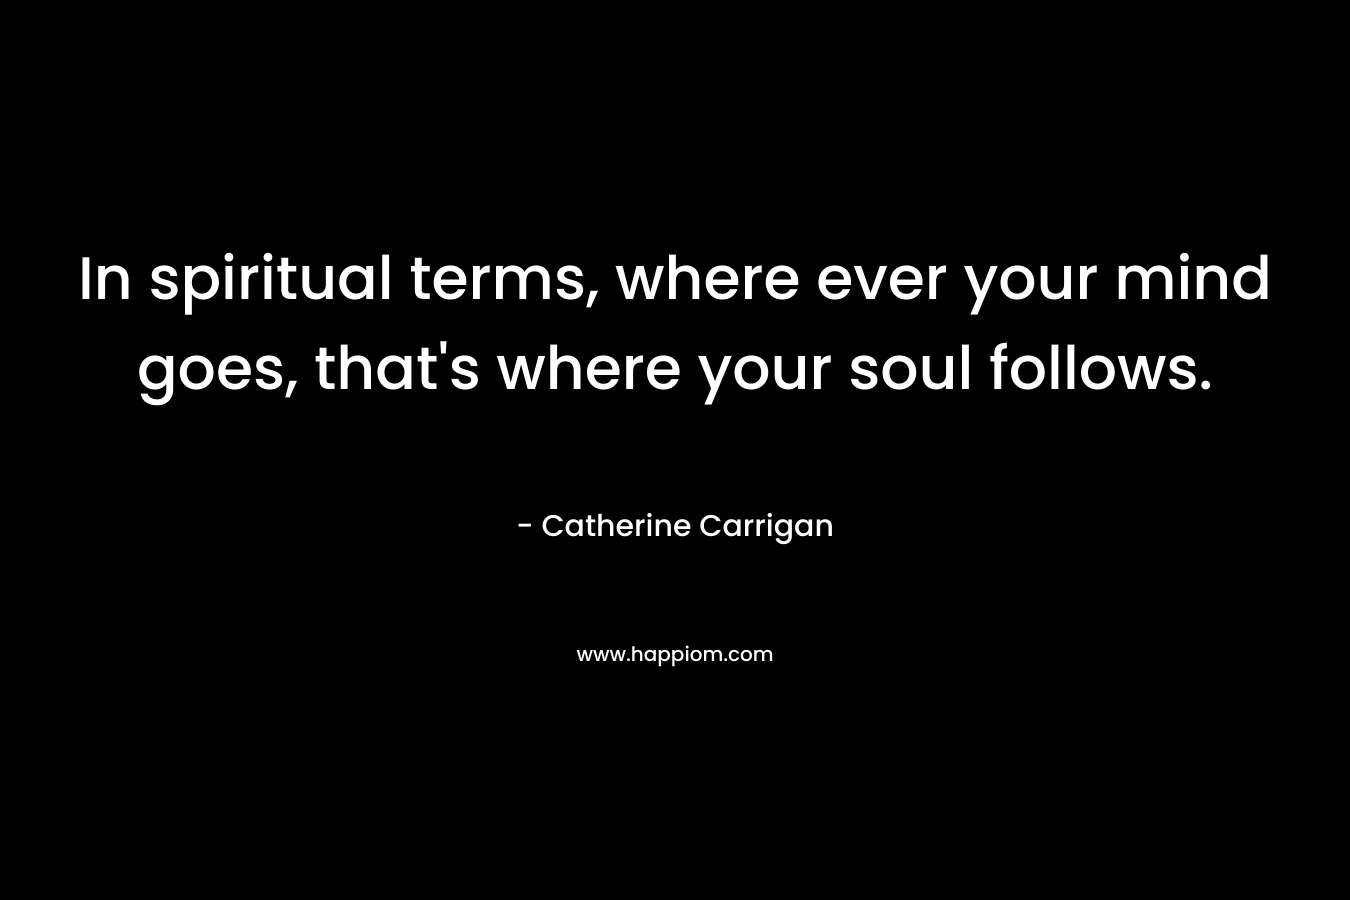 In spiritual terms, where ever your mind goes, that's where your soul follows.